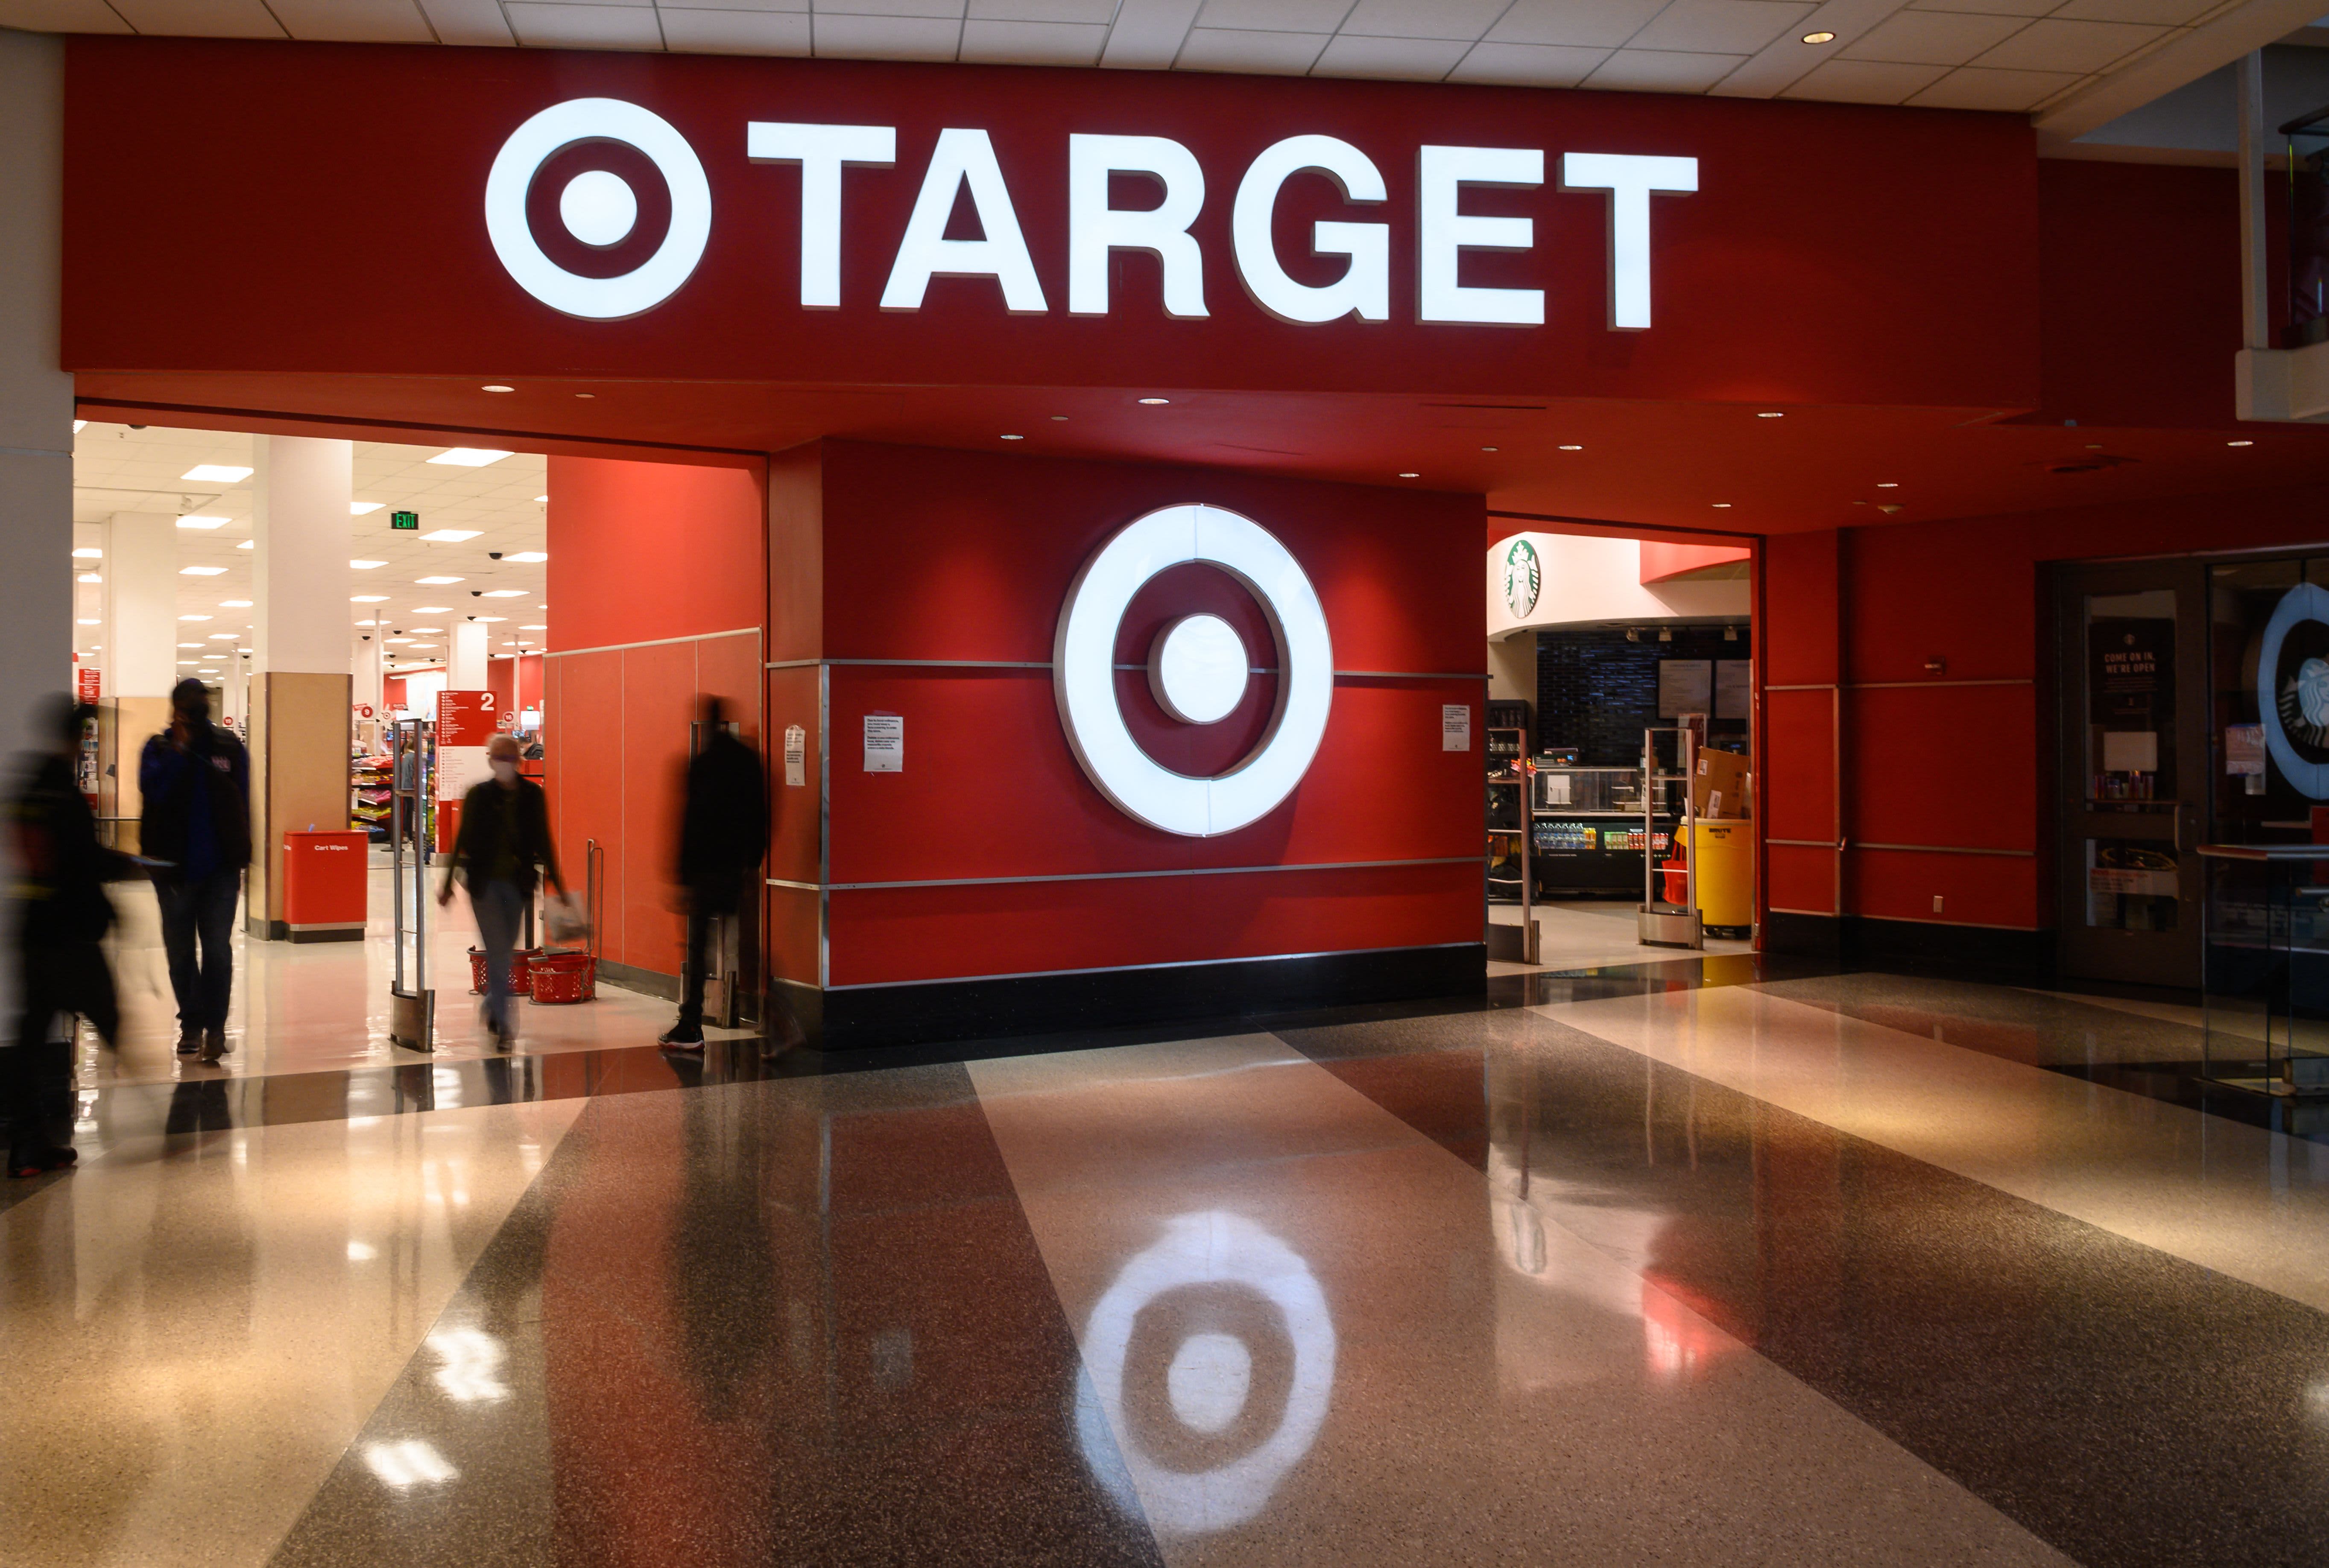 Target will report fourth quarter earnings before the bell